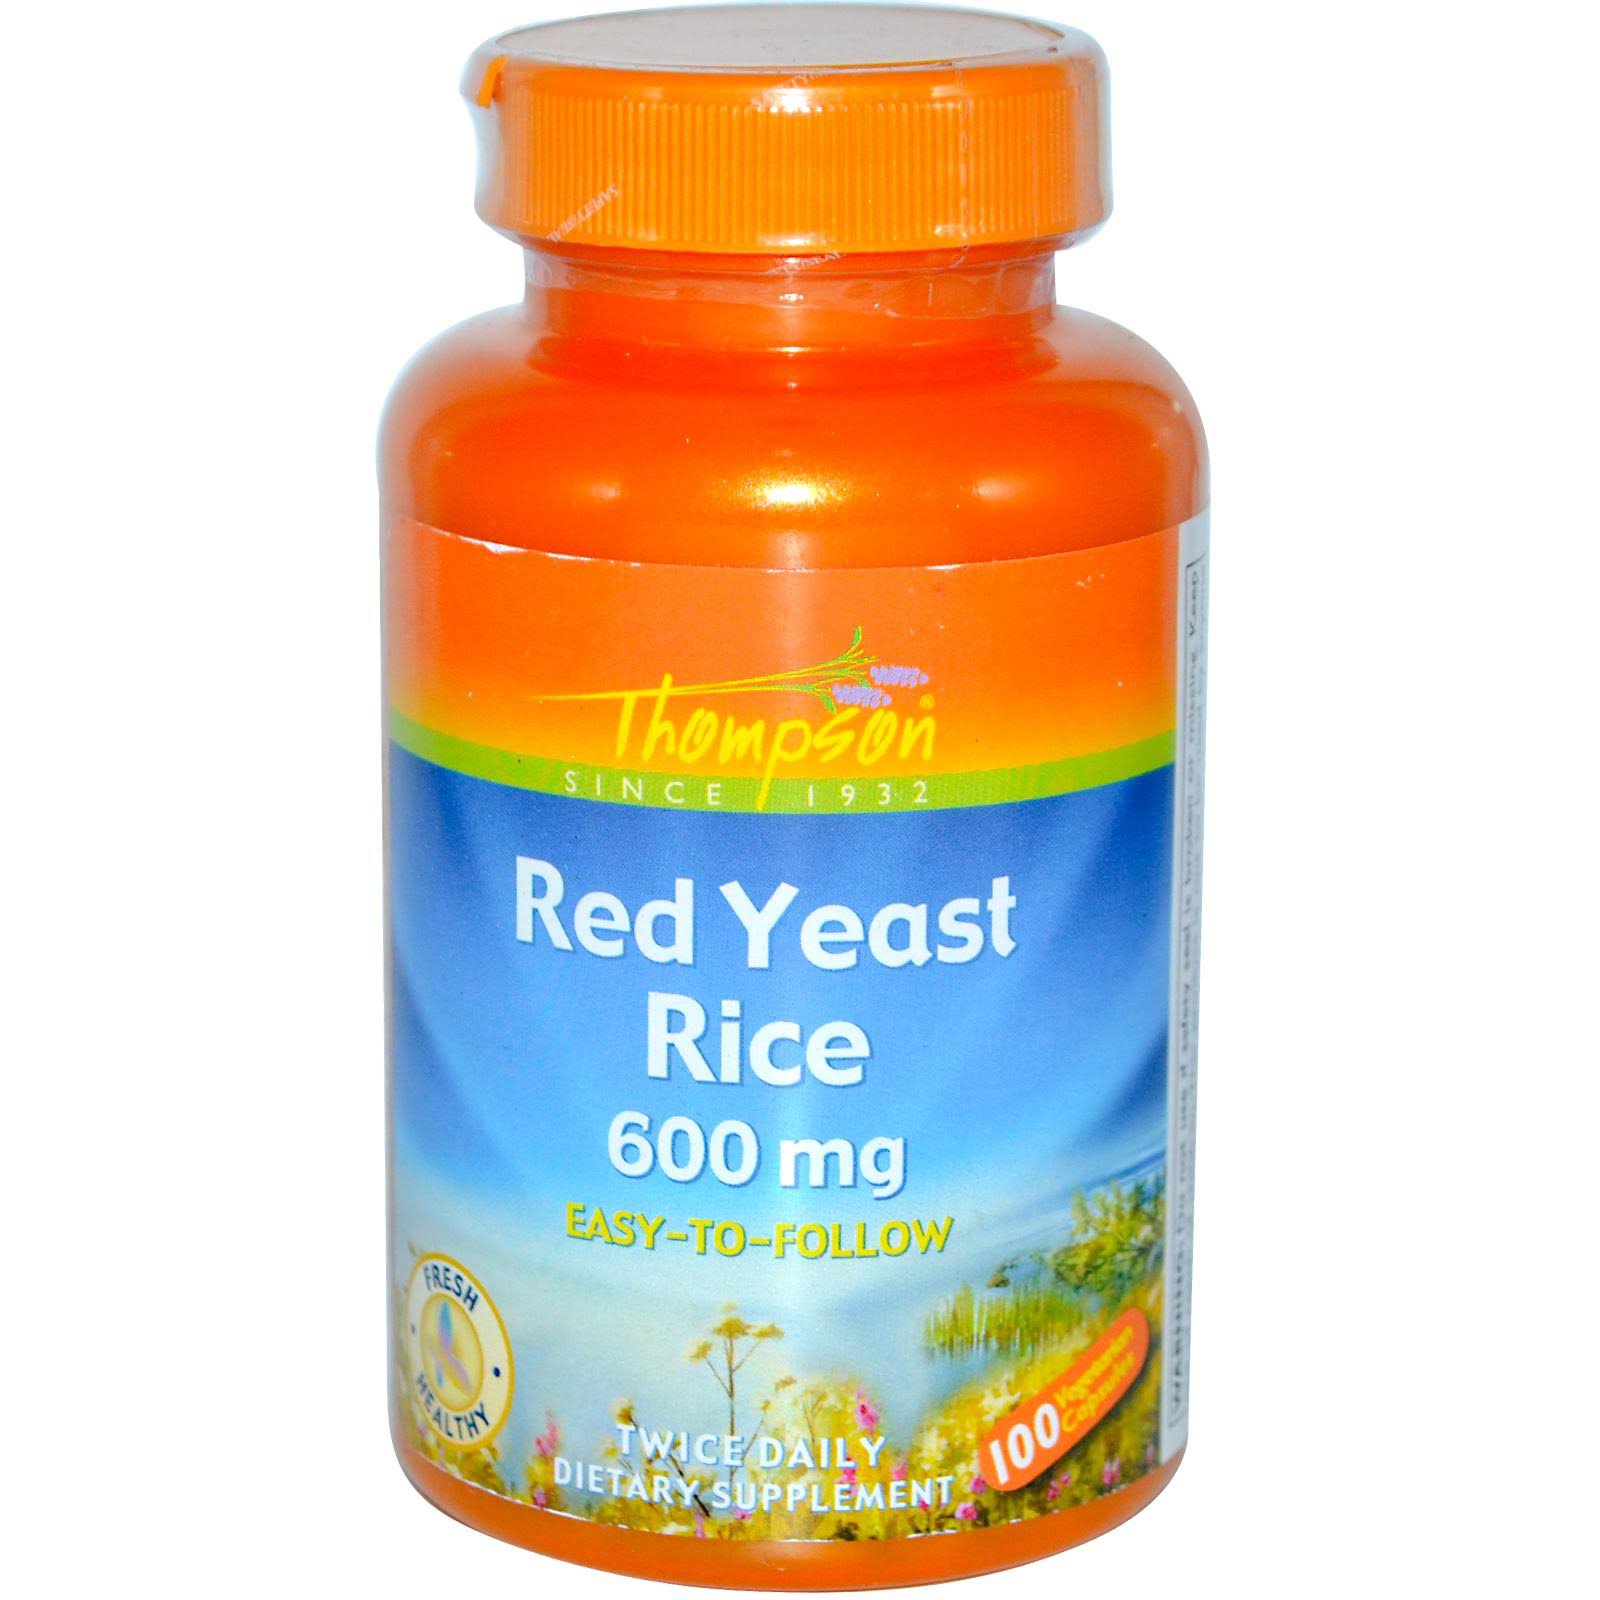 Thompson Nutritional Products Red Yeast Rice Supplement - 600mg, 100 Vegetarian Capsules